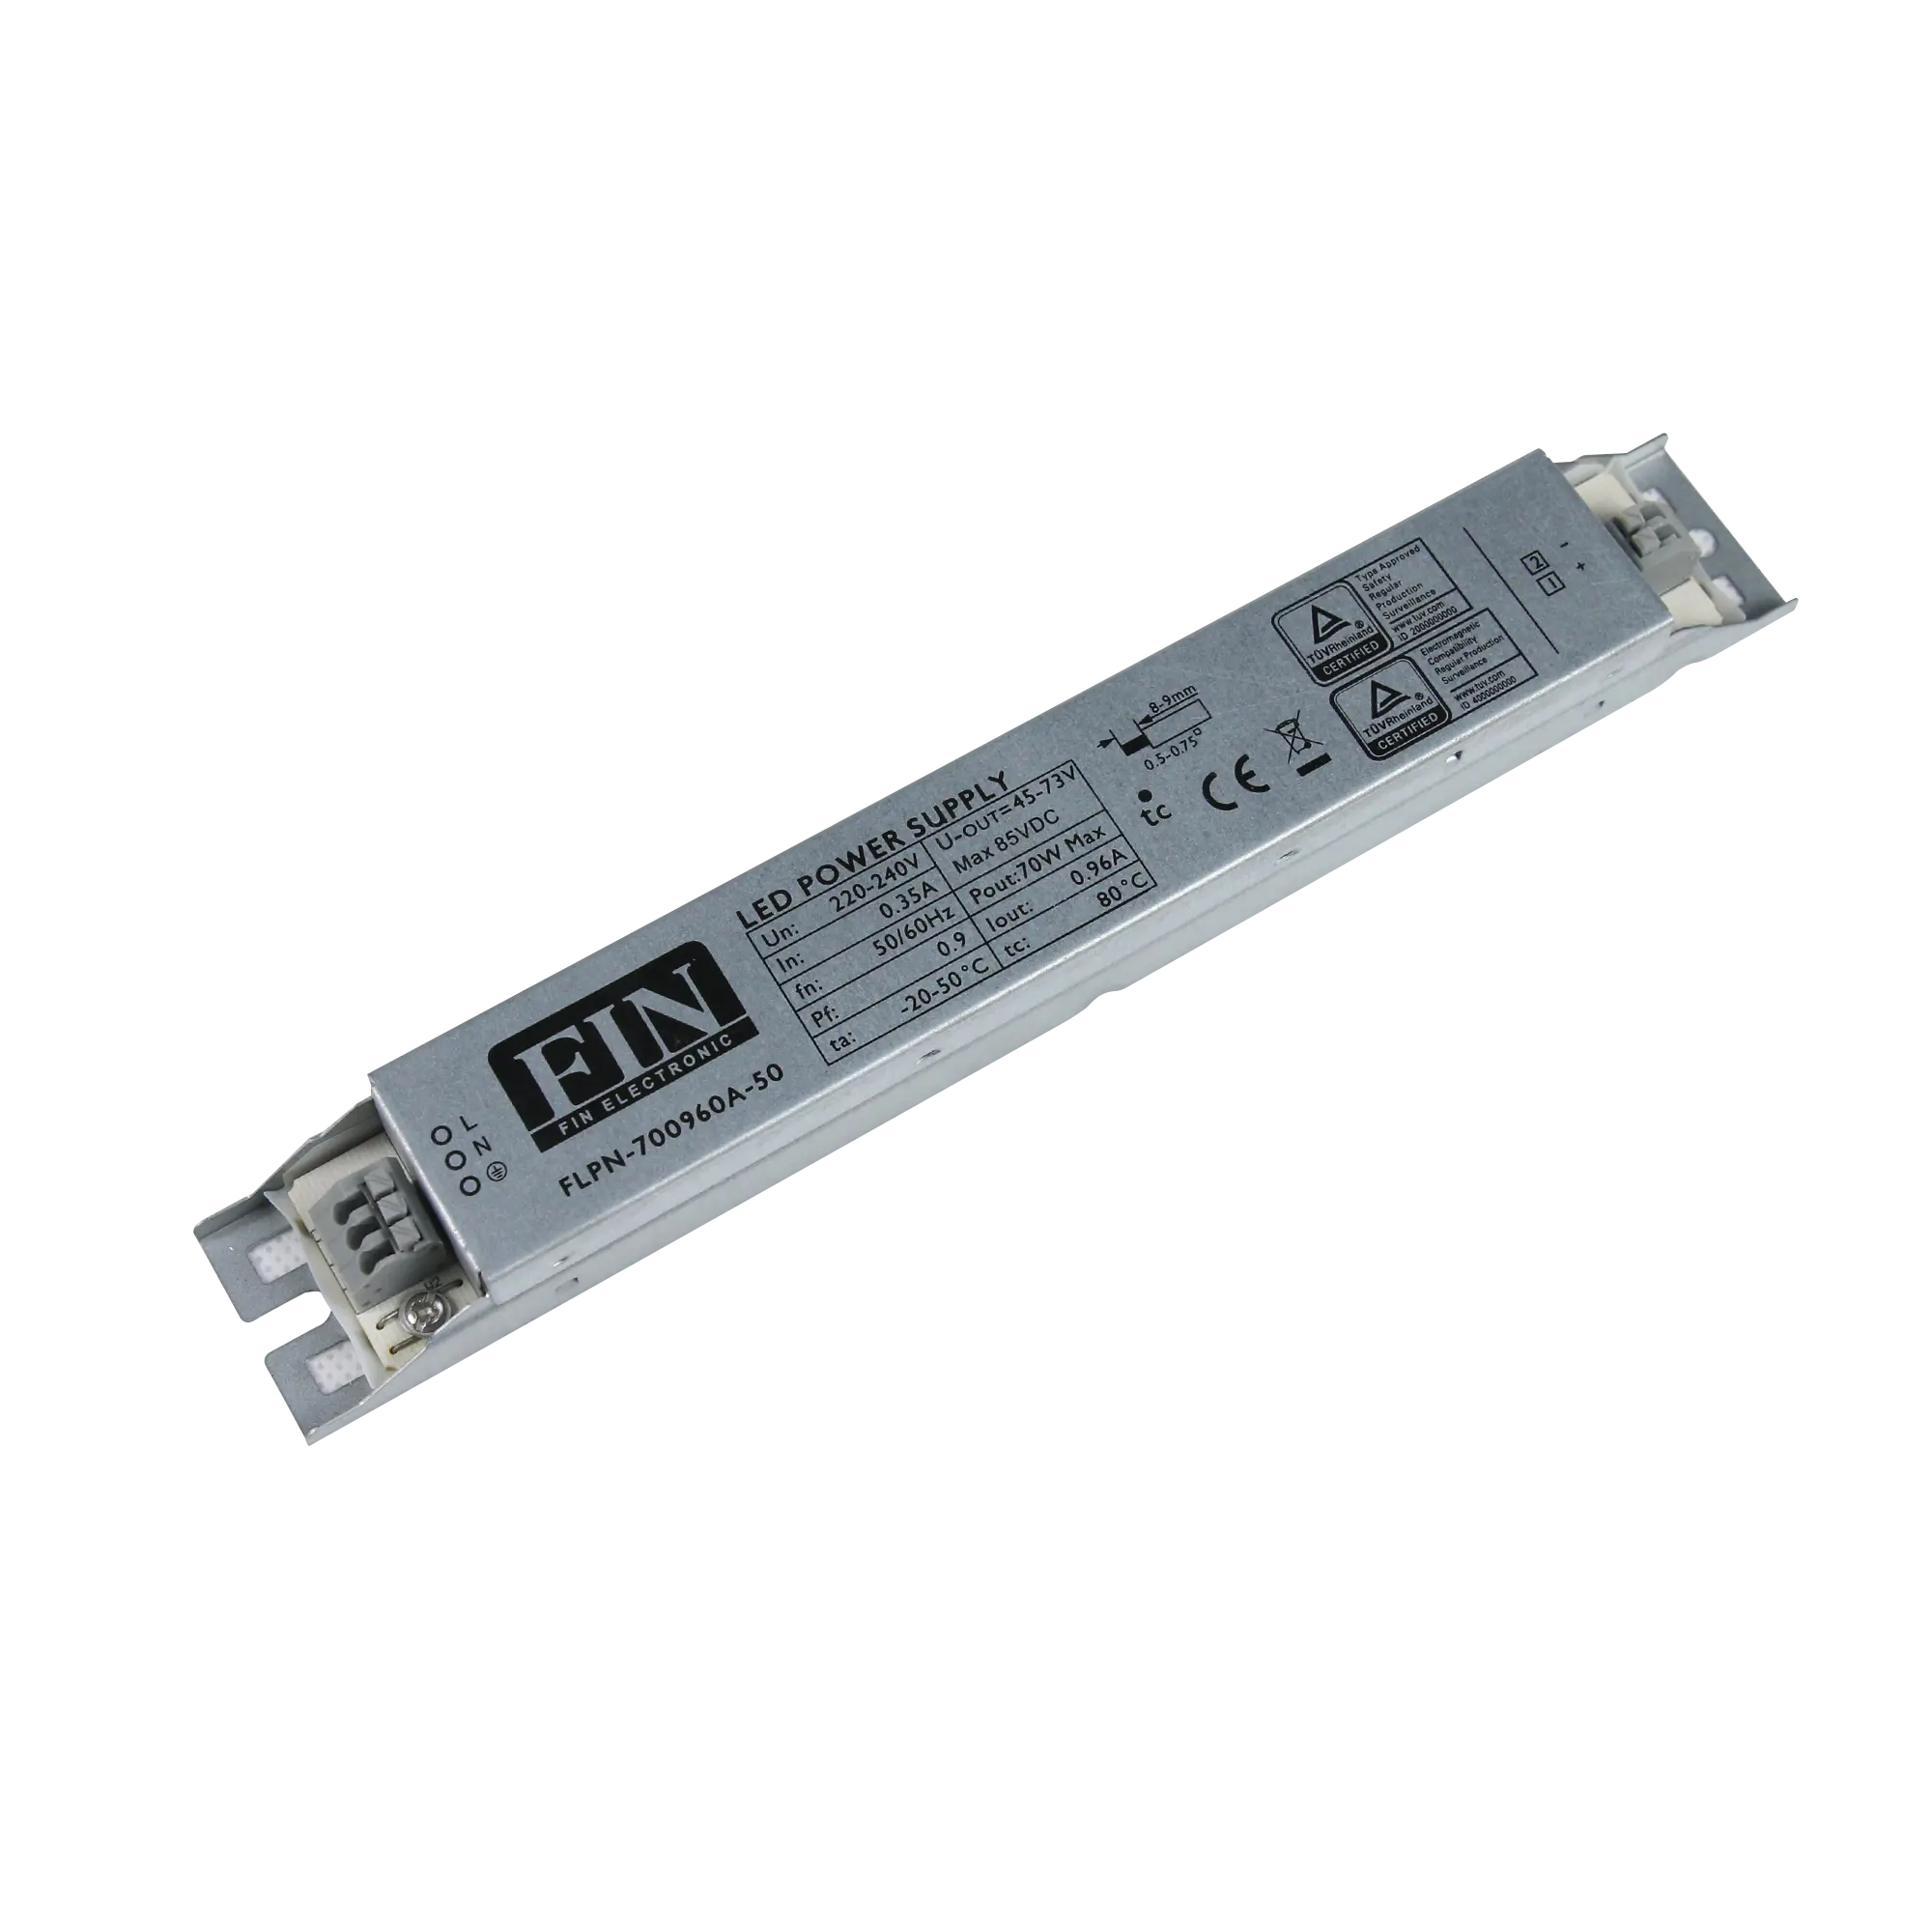 5 Years Guarantee Power supply CE approved LED driver for linear lamp use